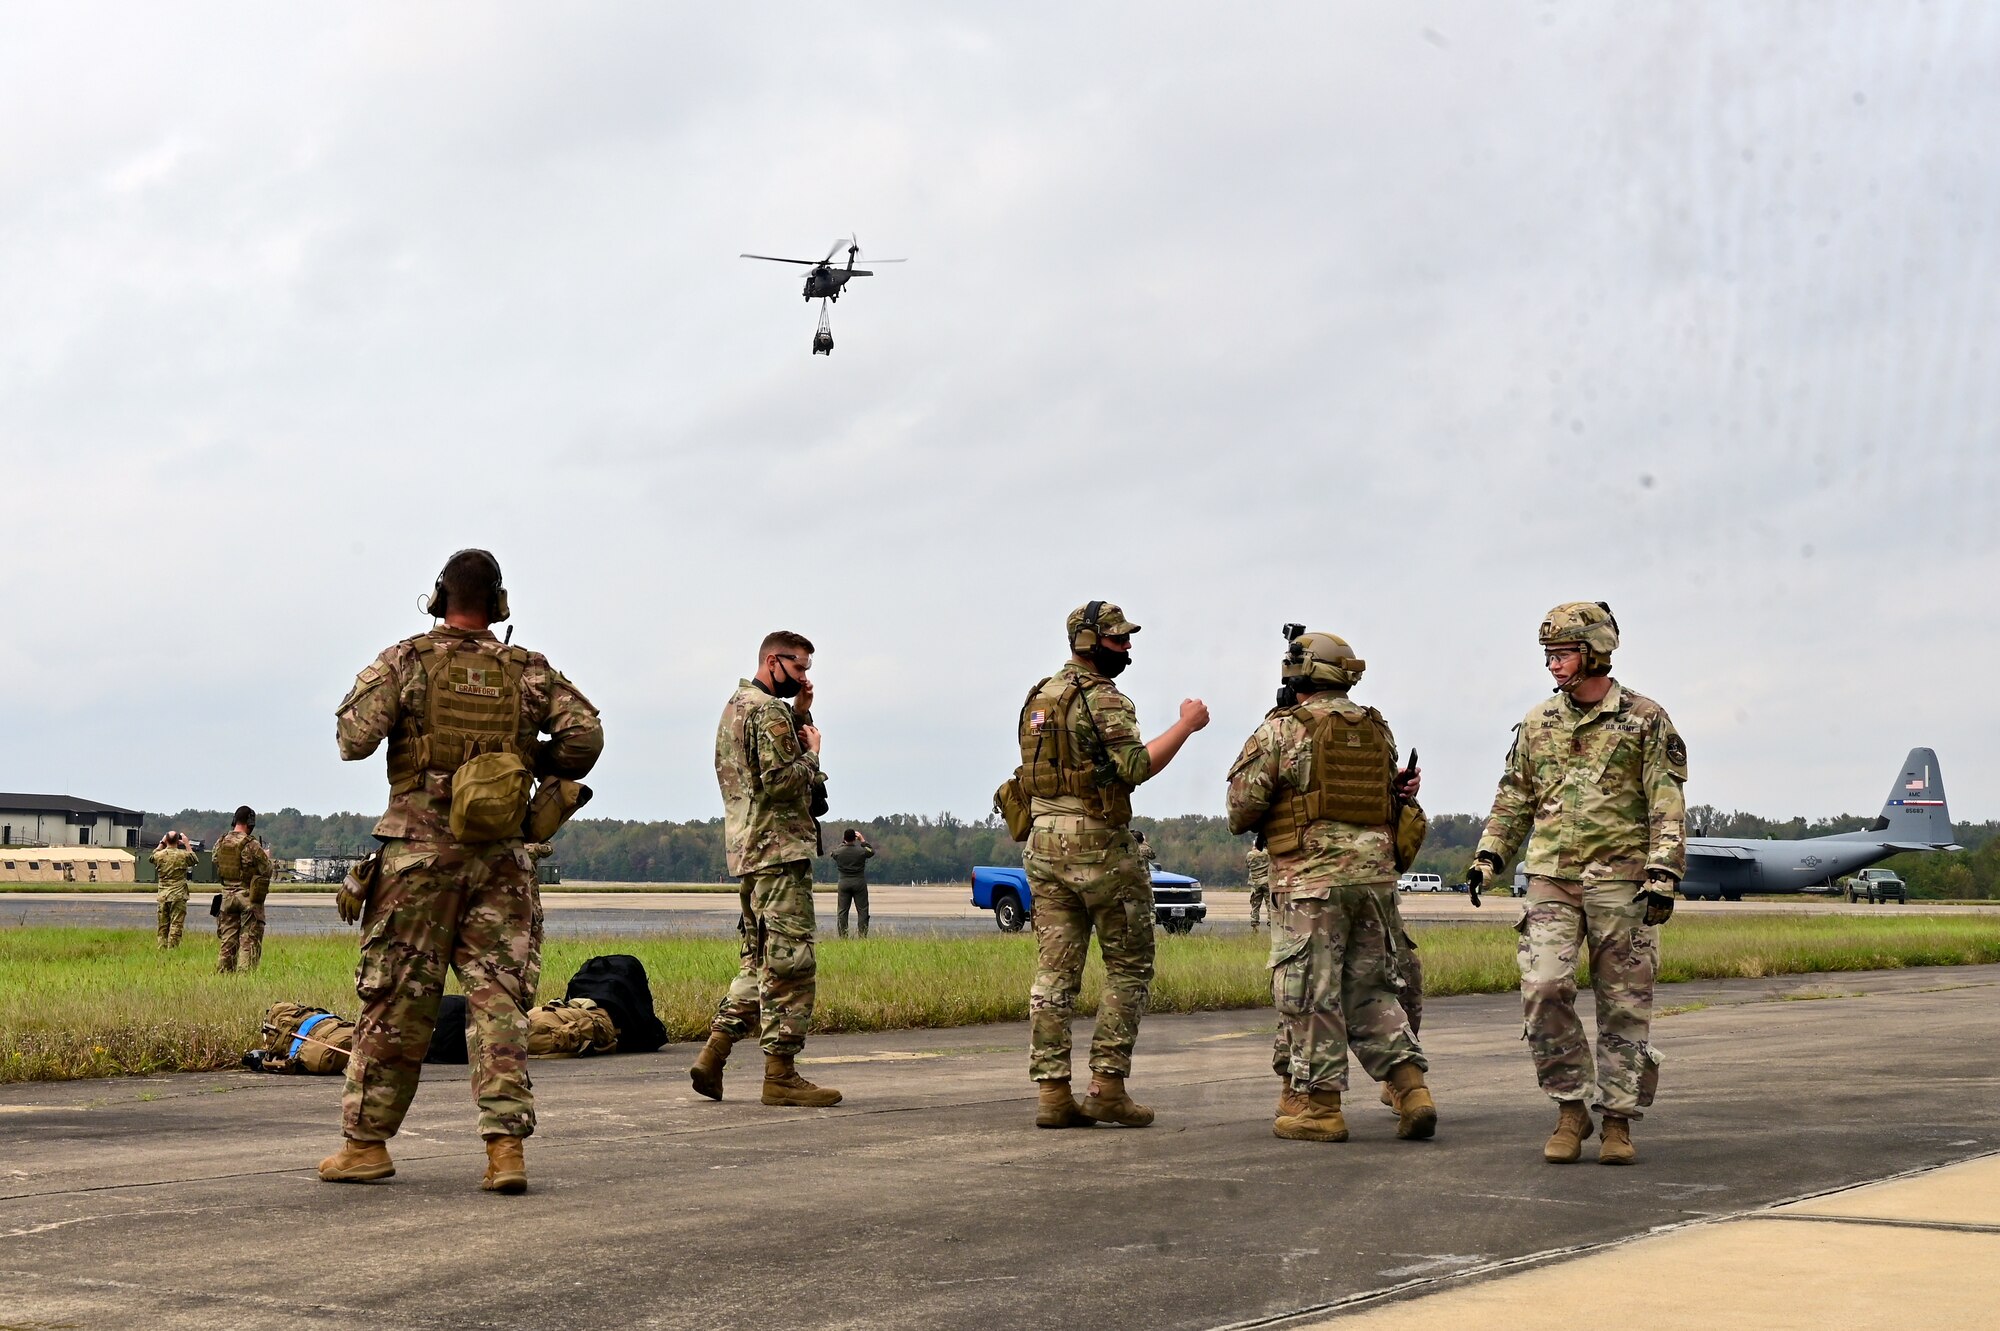 A group of Airmen and Soldiers watch a helicopter fly away.